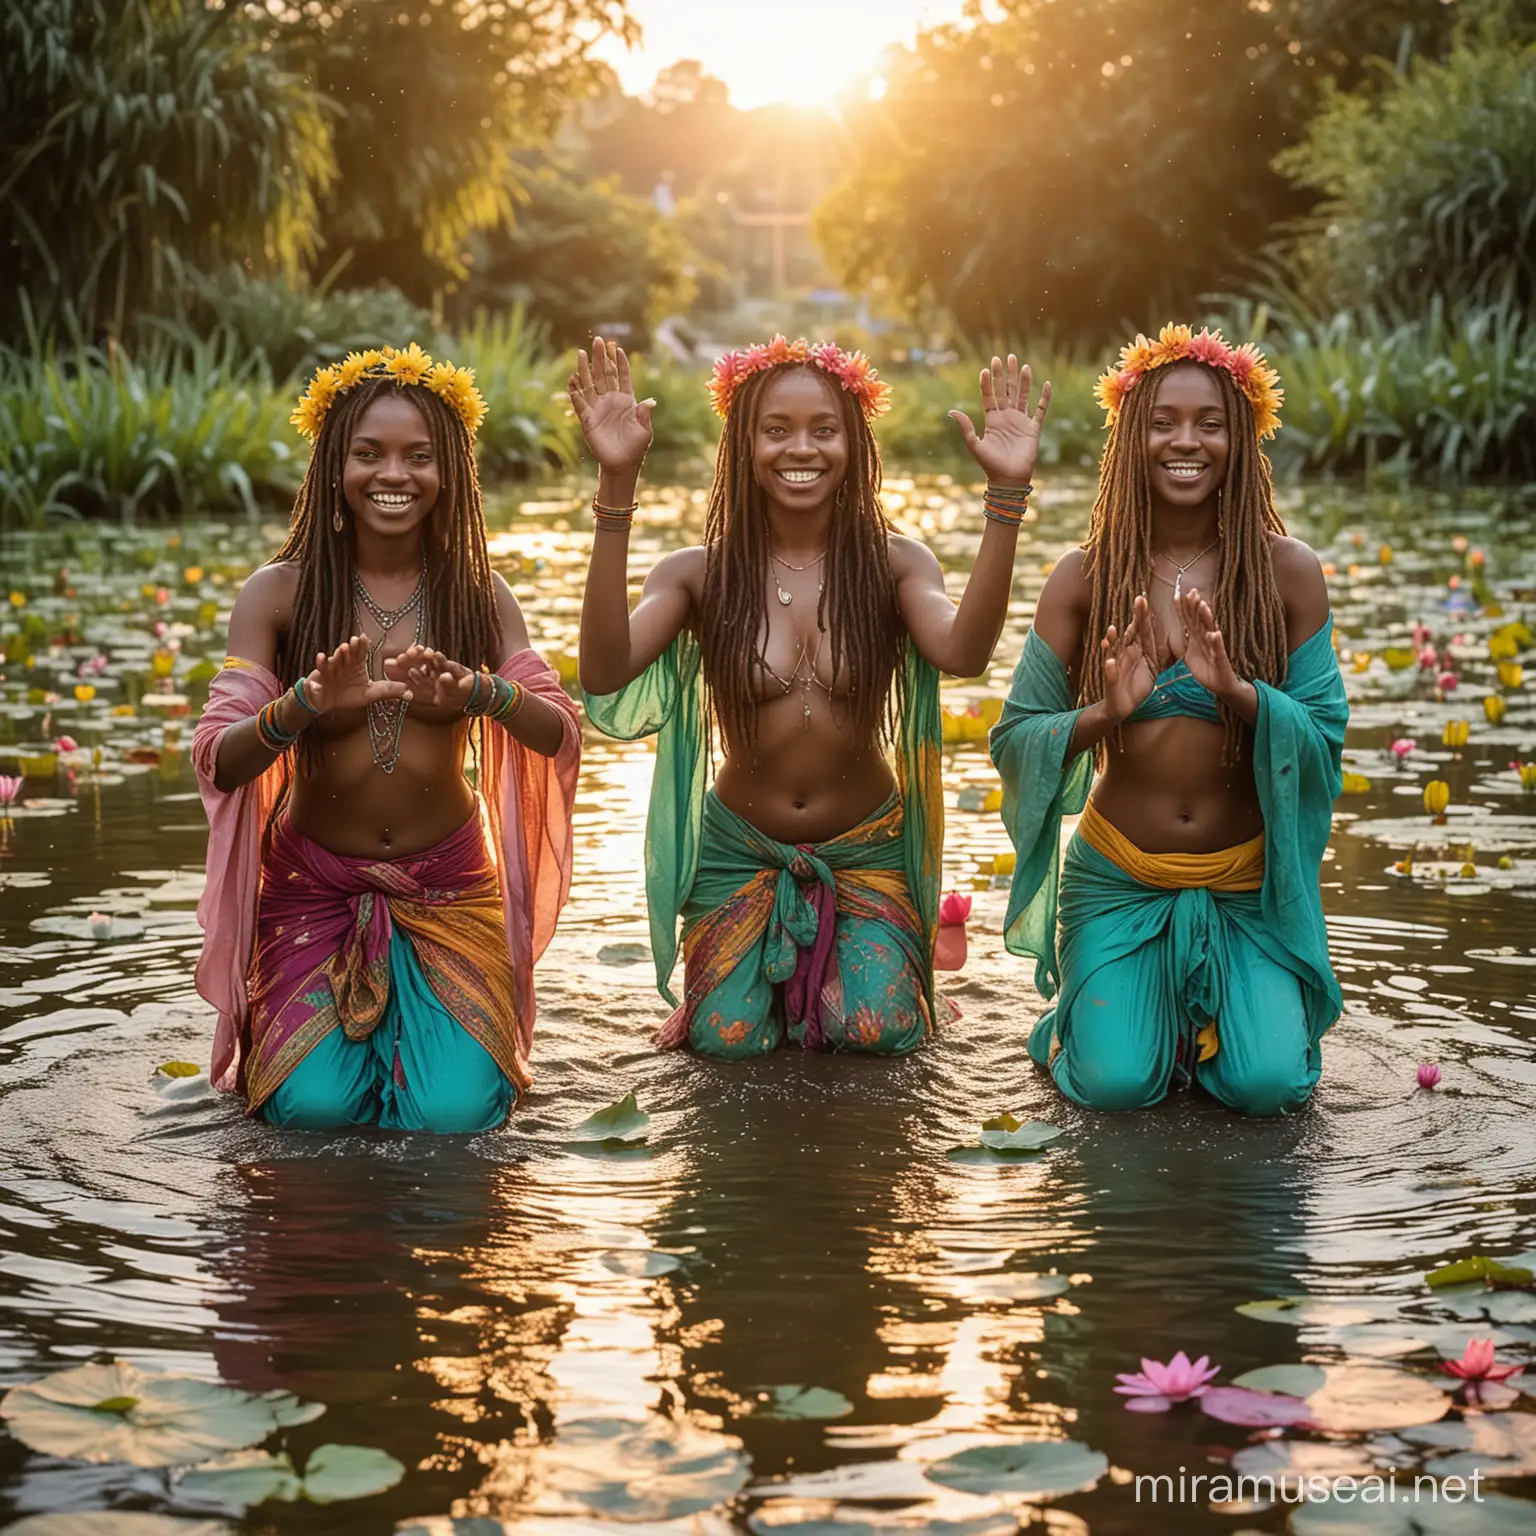 3 women from cameroon squatting inside high water, beating on the water surface with bare hands, no drums. water is splashing,  performing dynamic and active, asymmetric, looking into to different directions, they are slim and extra tall, long dreadlocks, smiling inside, open hair style, benares court mughal scenario, river ghats with water lilies an lotus, turquoise, magenta, yellow, green, white, fingers and hands in realistic position, background blurred and in multiple colors wearing of heavily, psychedelic, pastel colors, sunrise.
